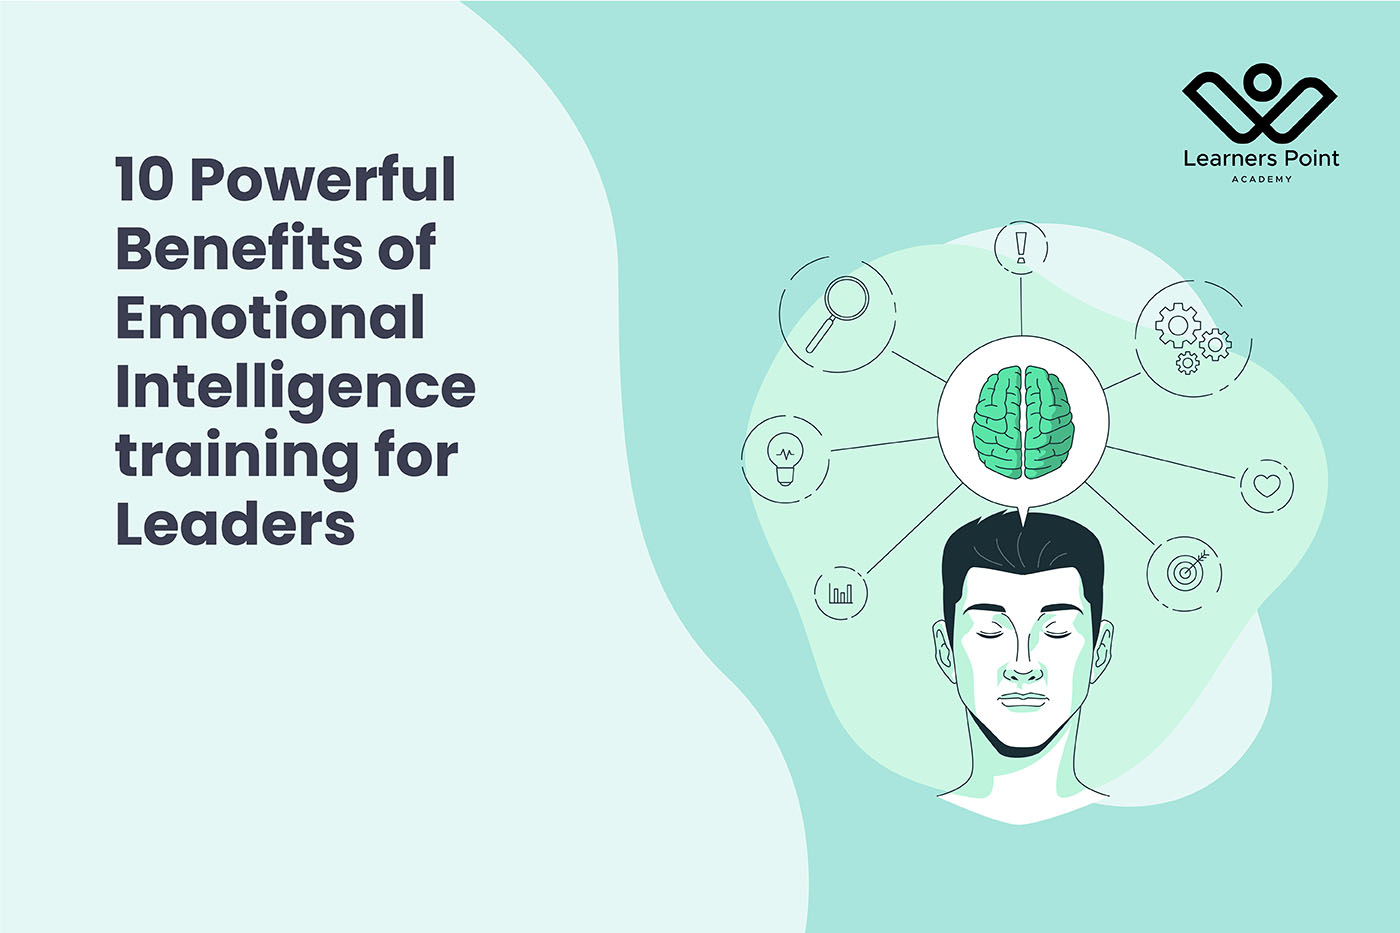 10 Powerful Benefits of Emotional Intelligence training for Leaders